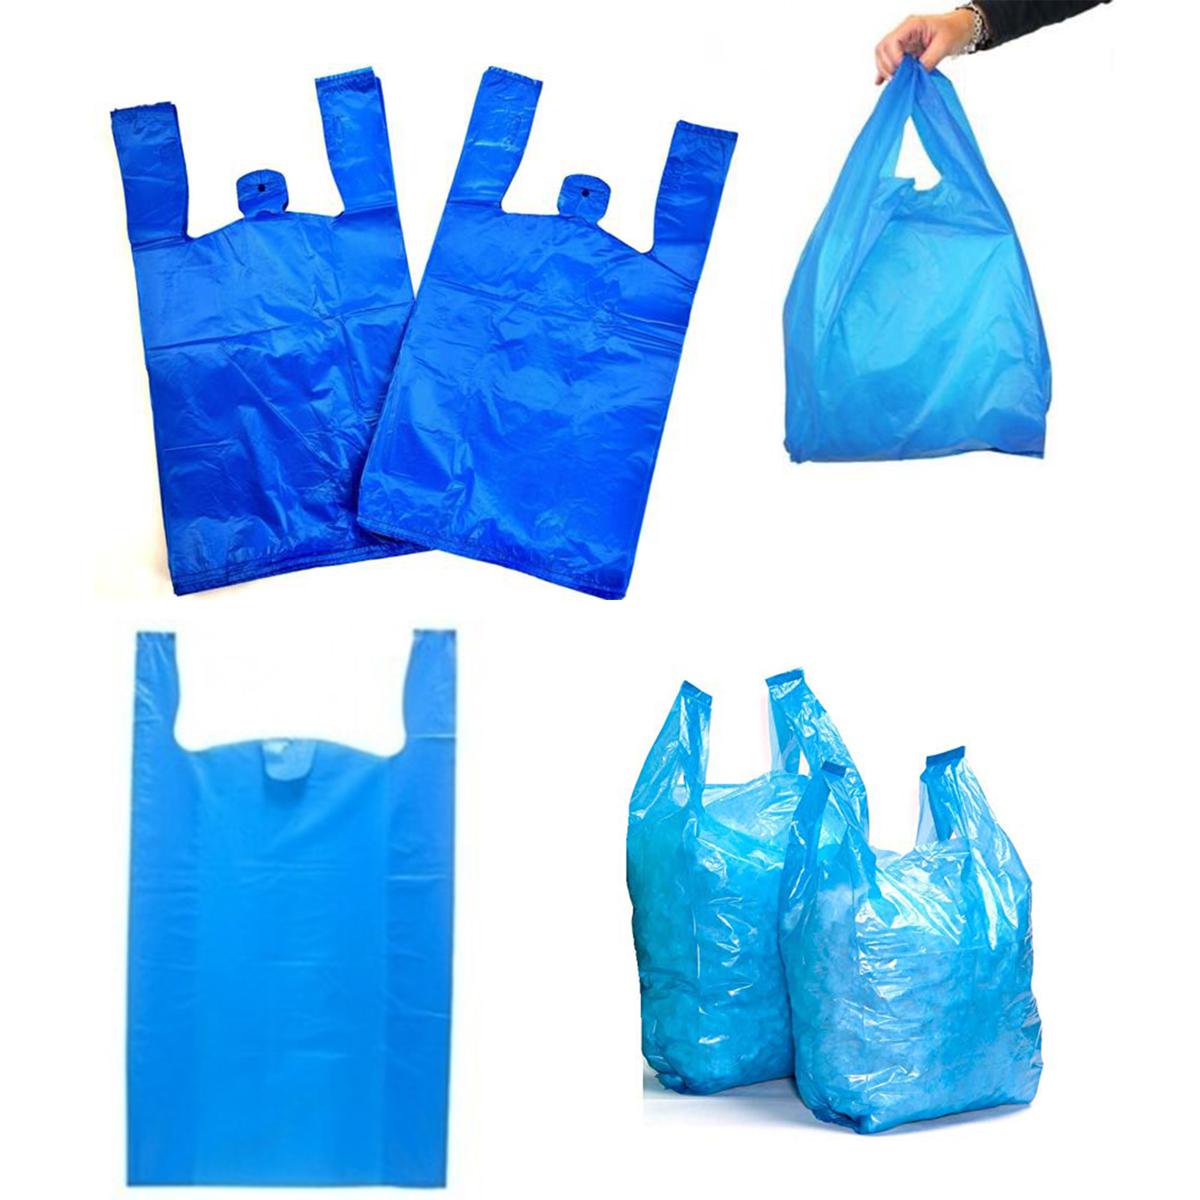 All Sizes 1 kg to 20 kg Bundle of 500-G- Plastic Shopping Bags